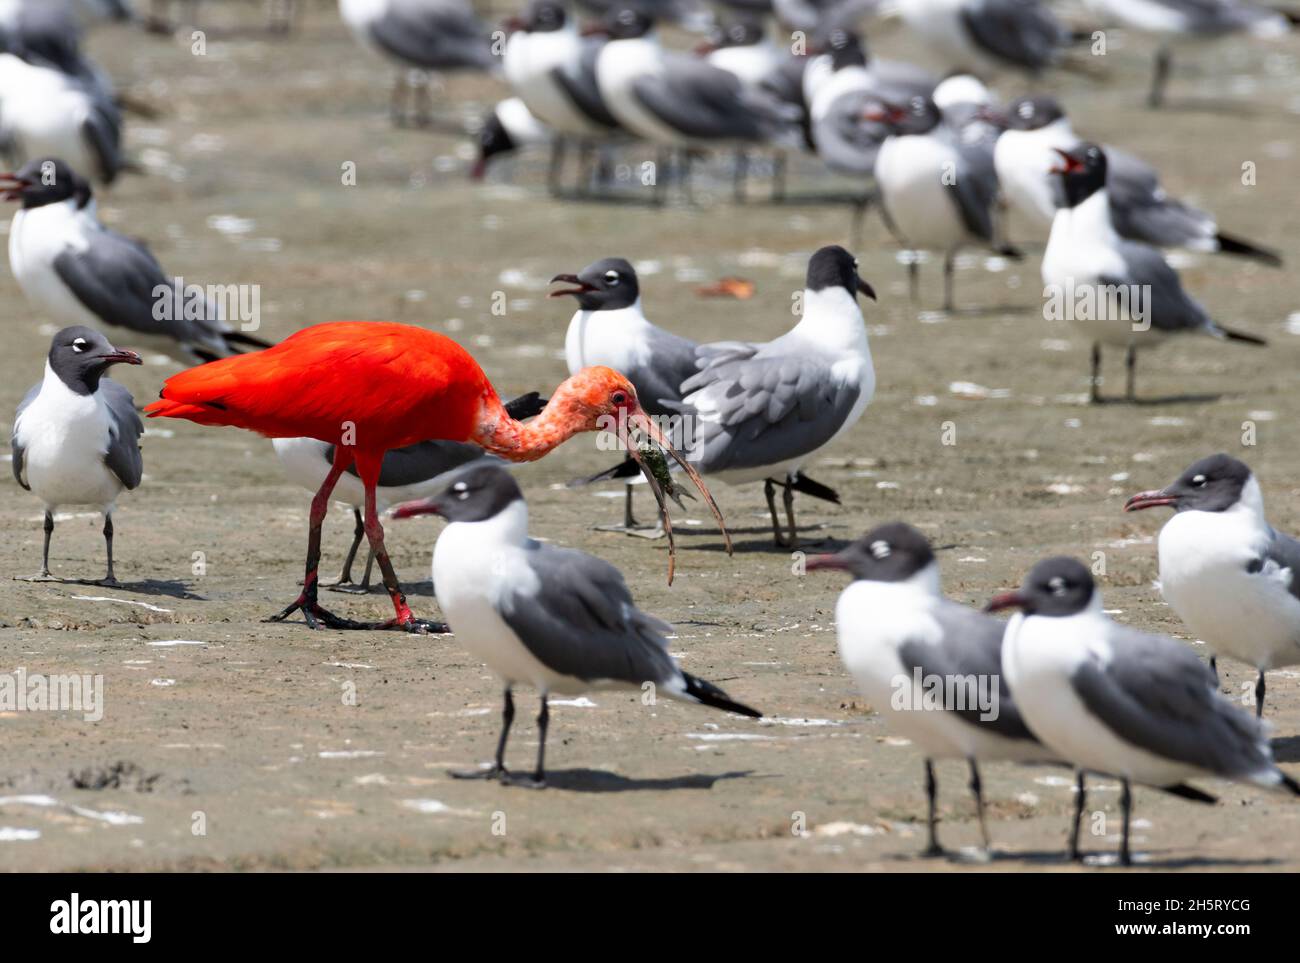 A lone Scarlet Ibis, Eudocimus ruber, national bird of Trinidad, feeding on fish from mudflats among a flock of Laughing Gulls. Stock Photo